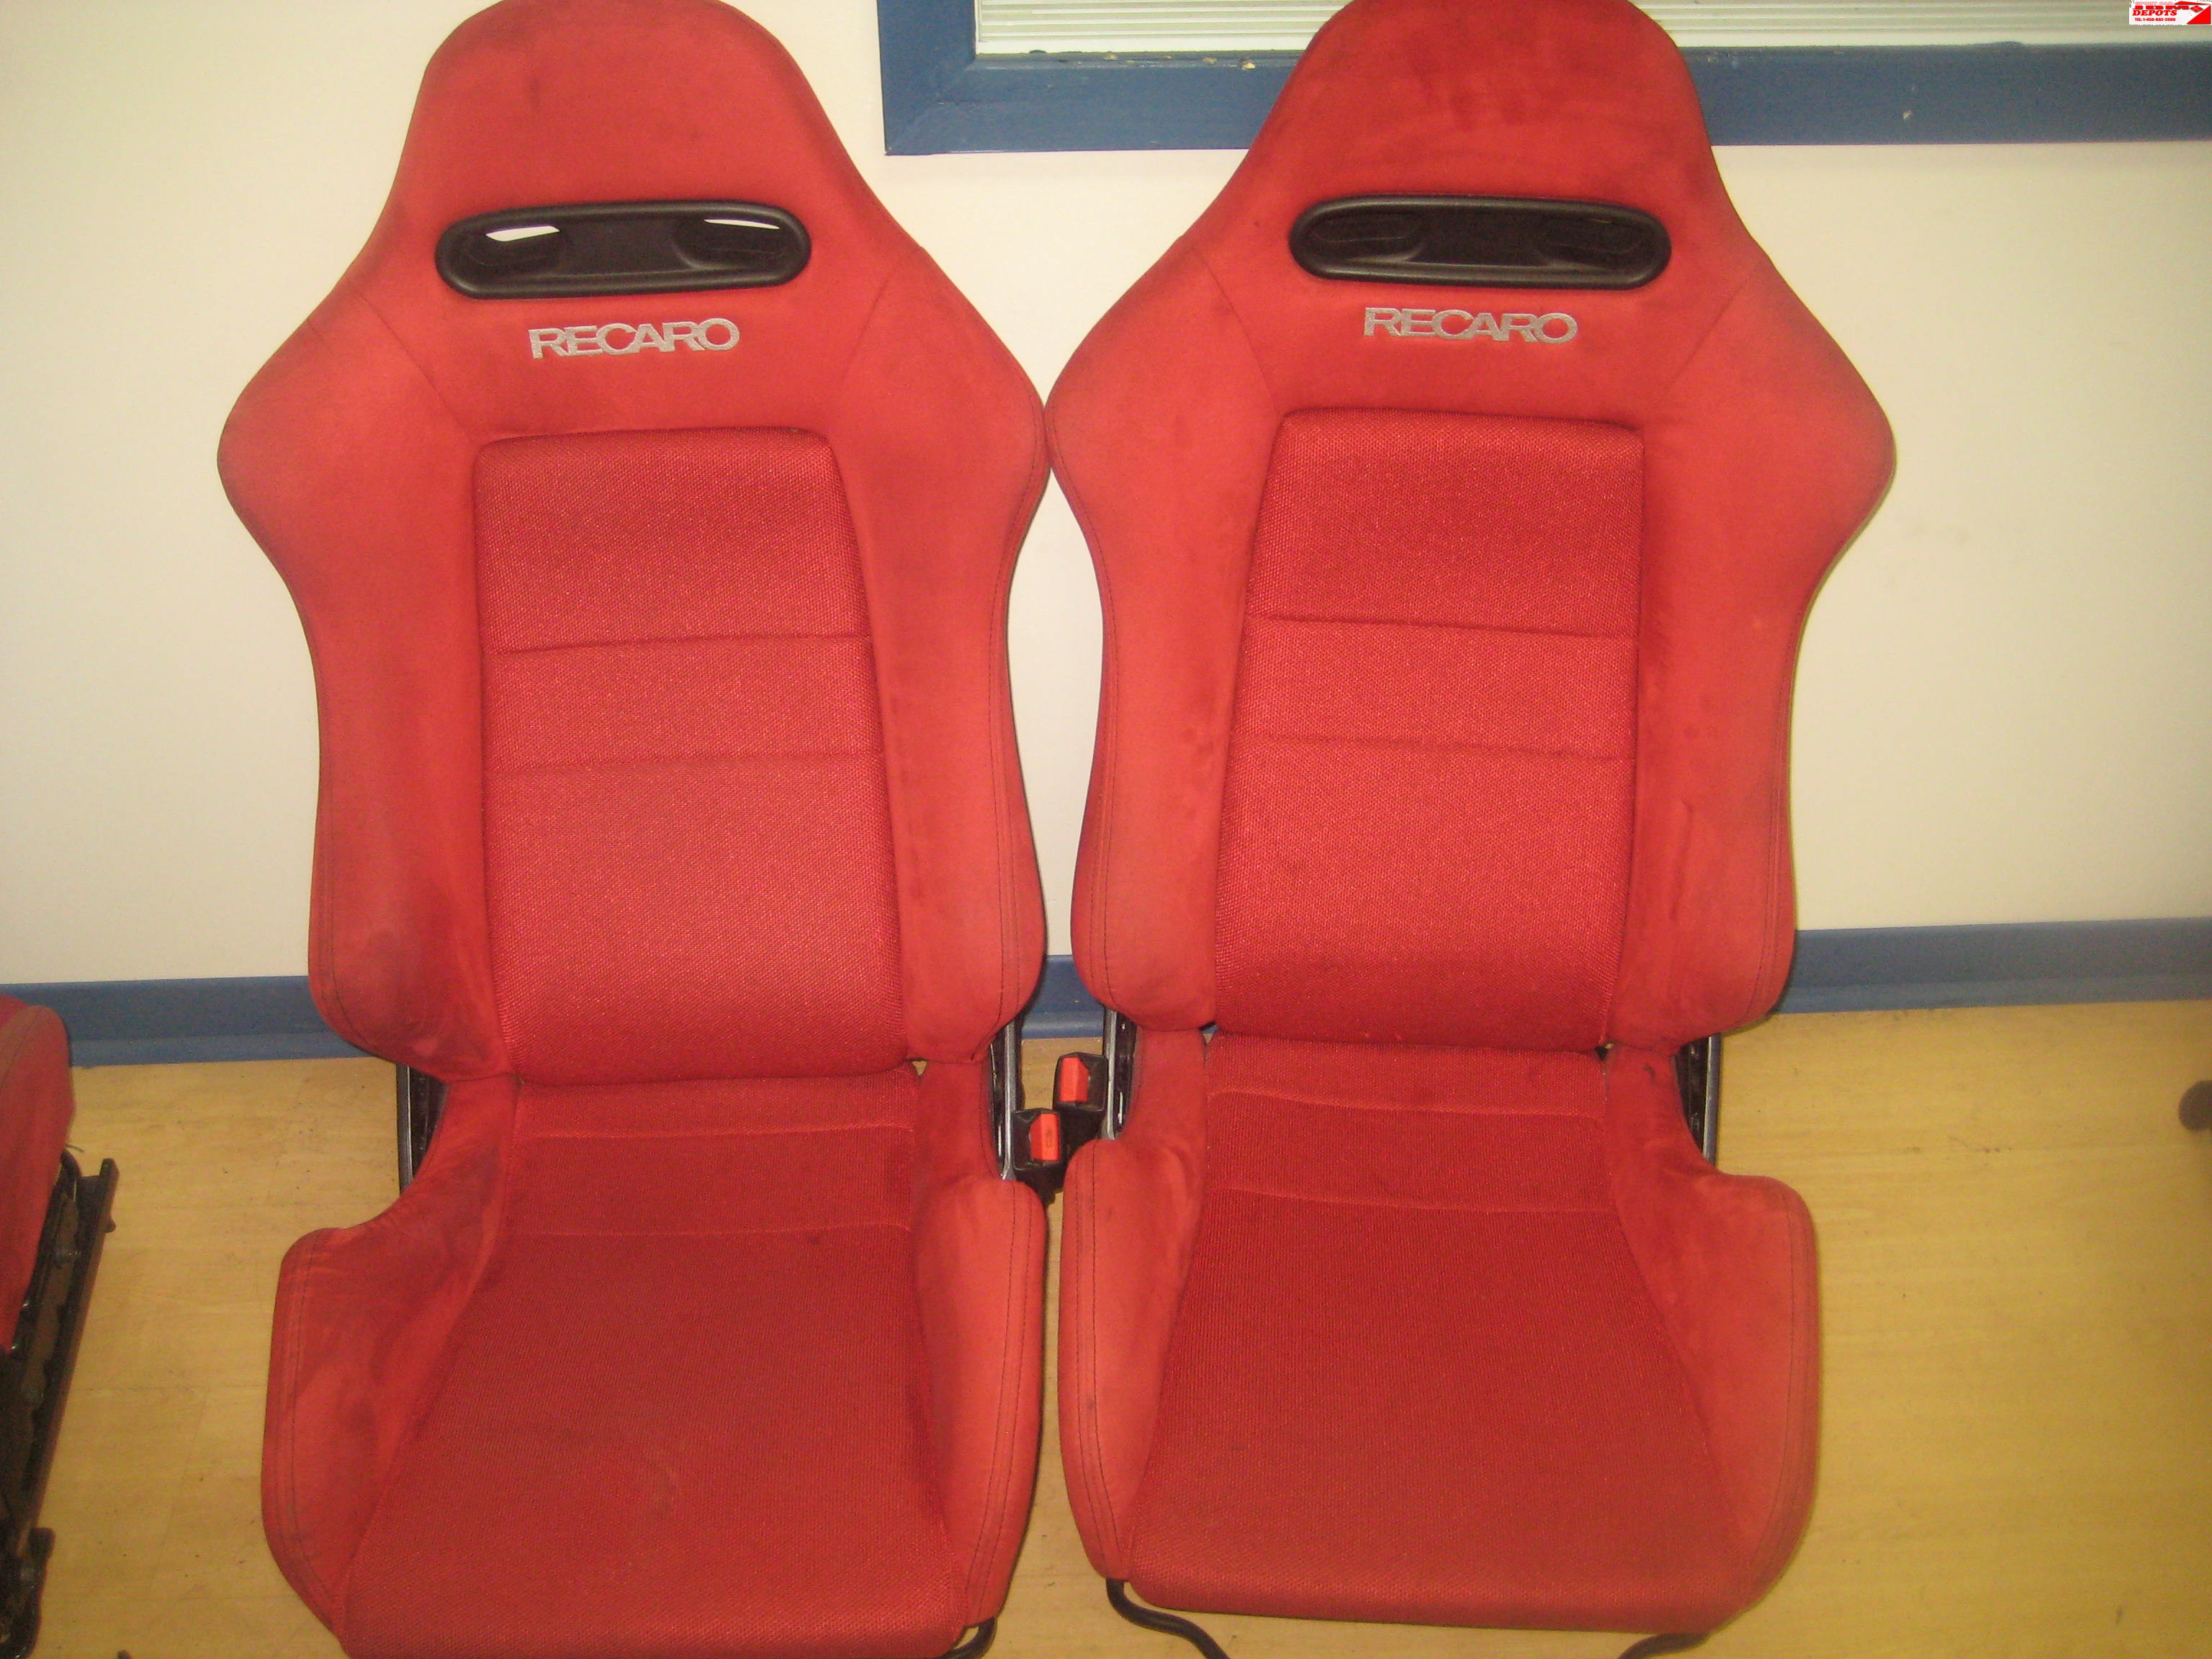 2002 2003 2004 2005 ACURA RSX DC5 K20A TYPE R SPEC R FRONT RED RECARO SEATS JDM